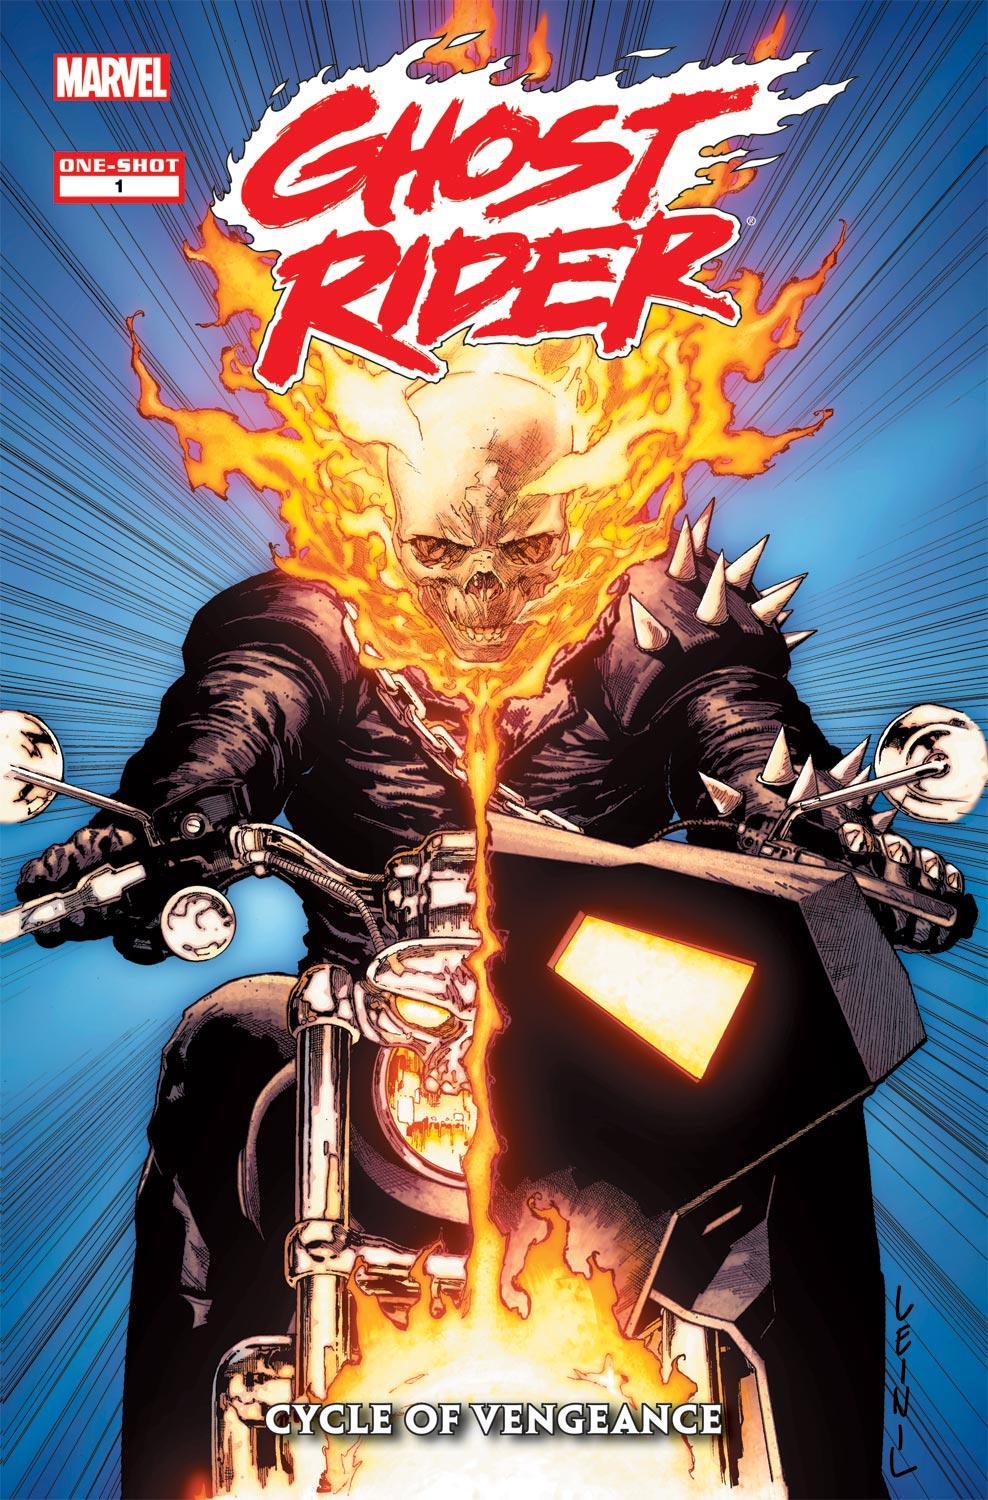 Ghost Rider: Cycle of Vengeance Vol. 1 #1